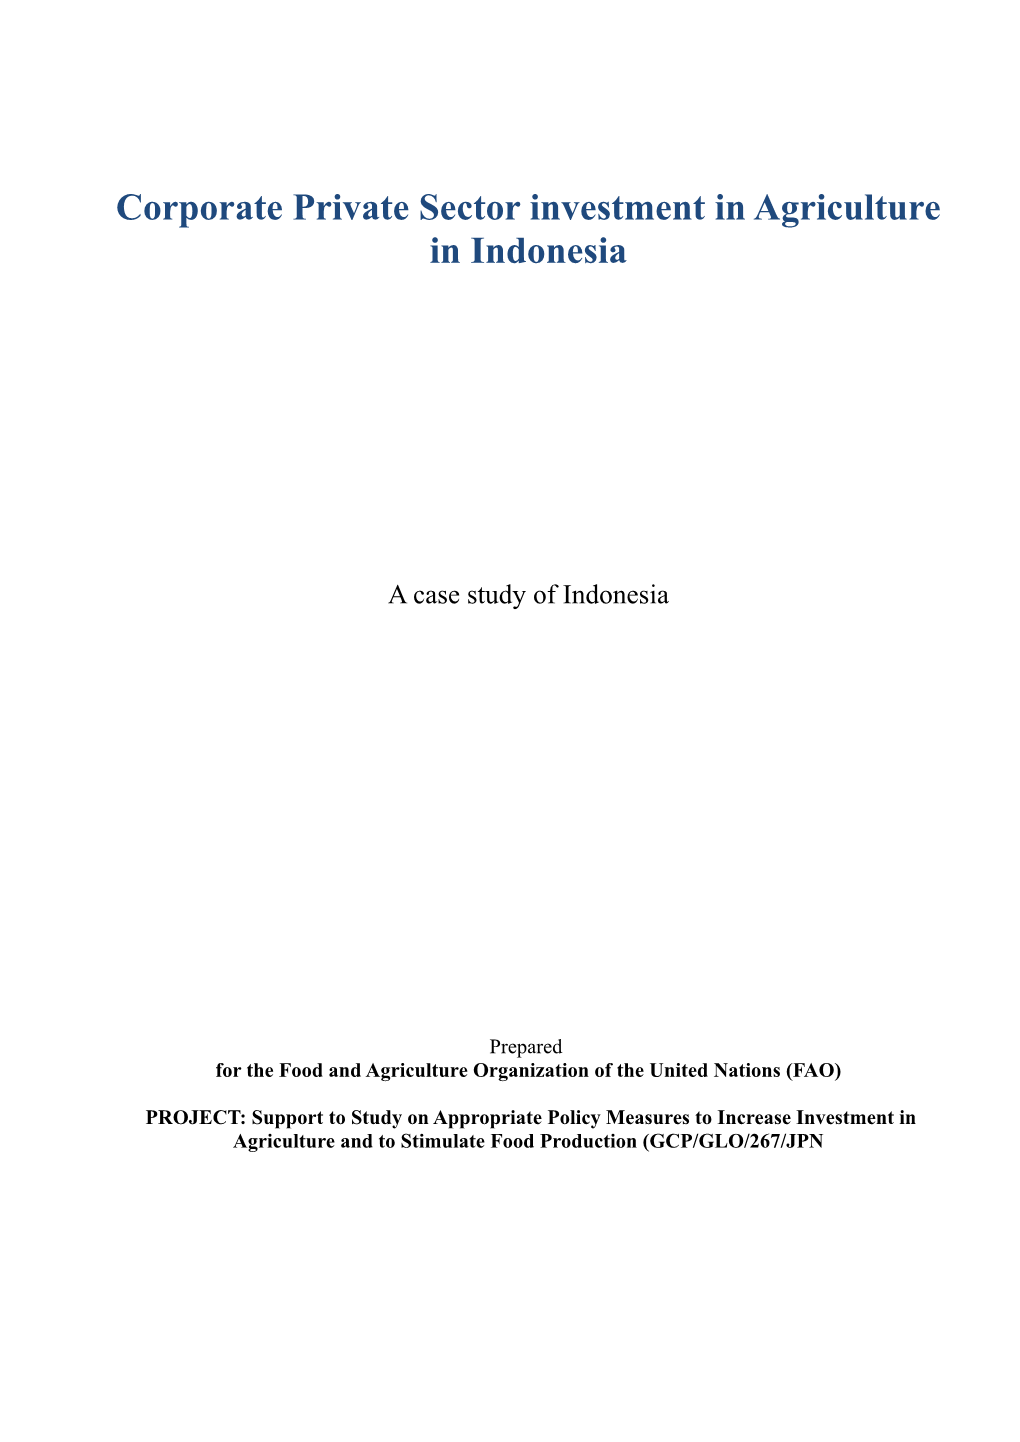 Corporate Private Sector Investment in Agriculture in Indonesia